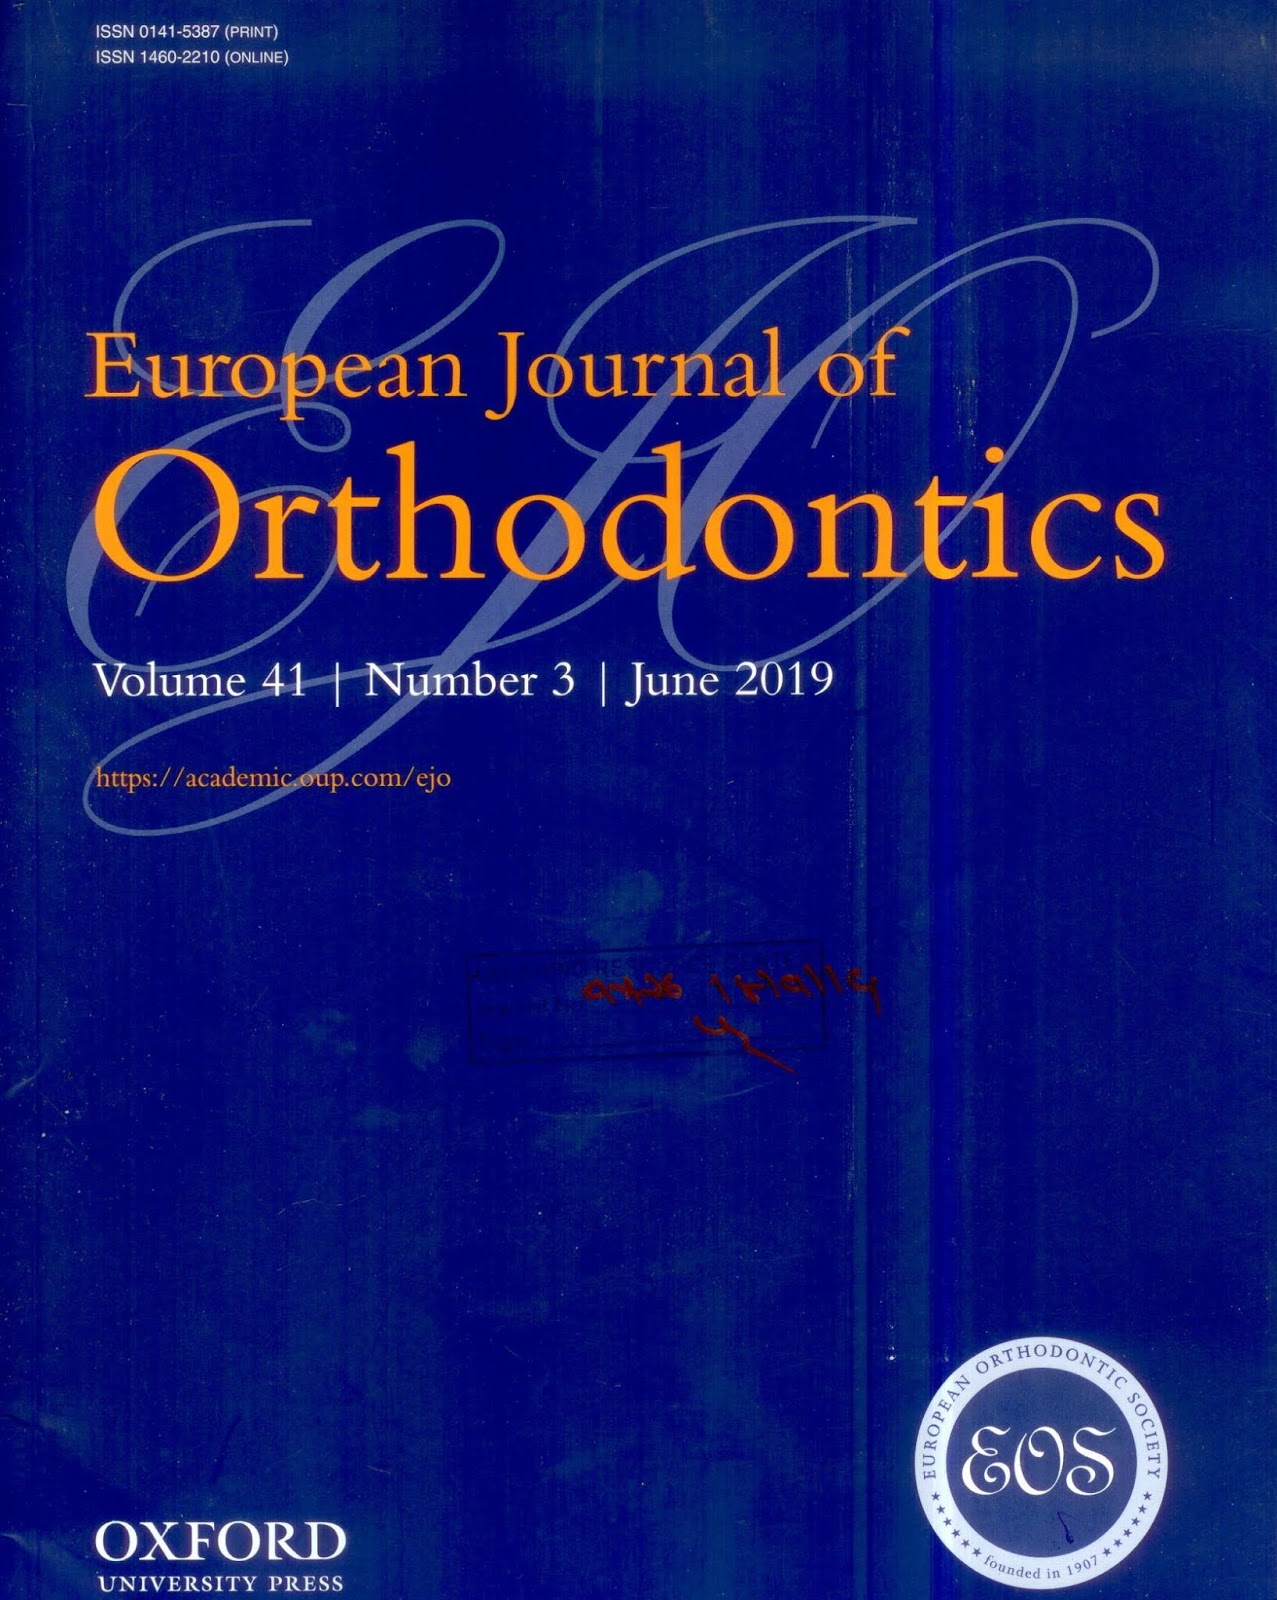 https://academic.oup.com/ejo/issue/41/3